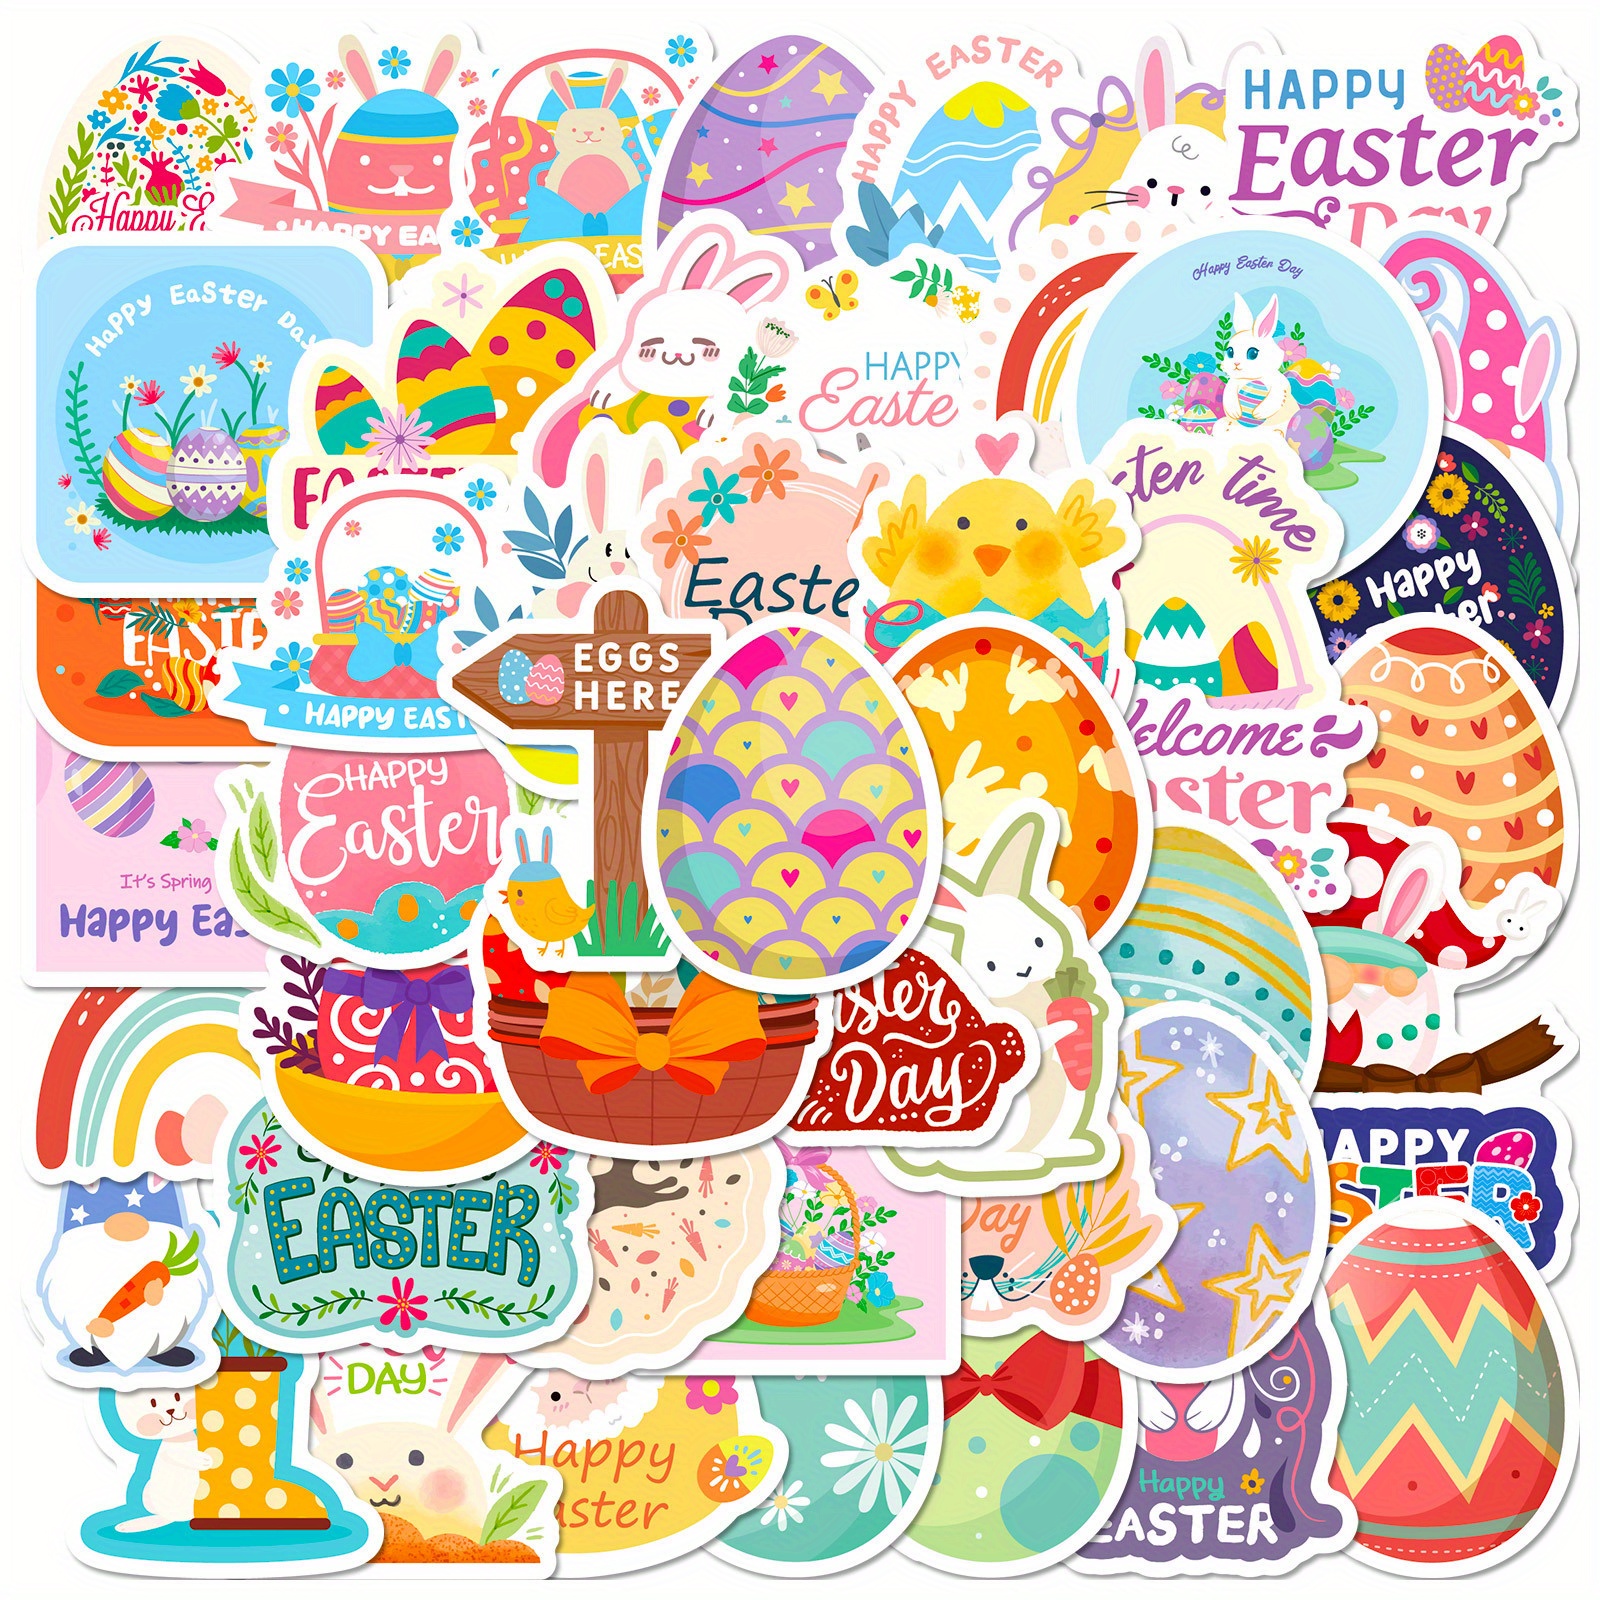 

50pcs Easter Cute Cartoon Egg Bunny Stickers For Mobile Phones, Computer Dyi Stickers For Notebooks, Water Cup Suitcase Decoration Stickers, Guitar Skateboard Bumper Waterproof Stickers